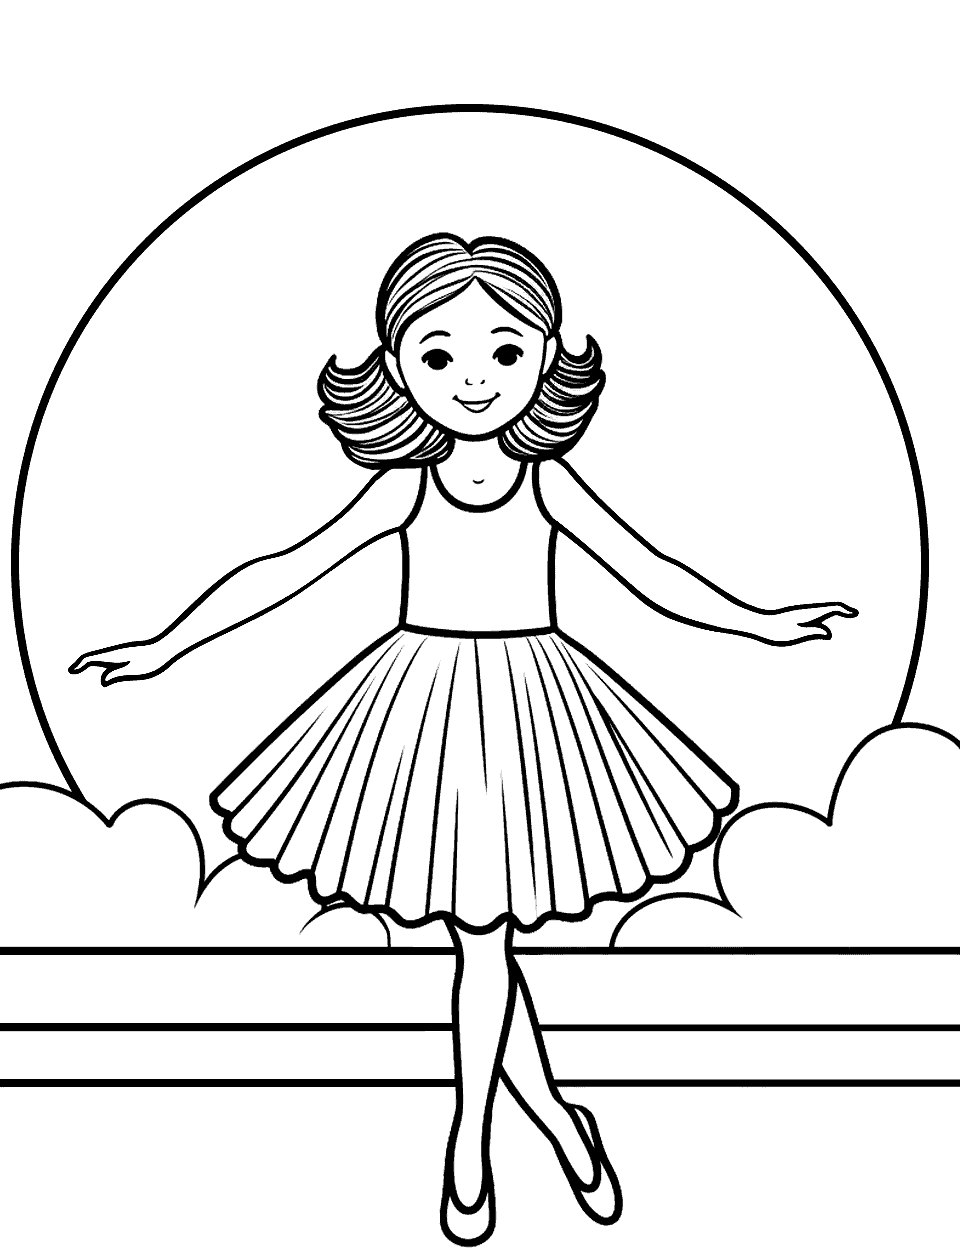 Dance Practice at Sunset Ballerina Coloring Page - A ballerina practicing her moves as the sun sets in the background.